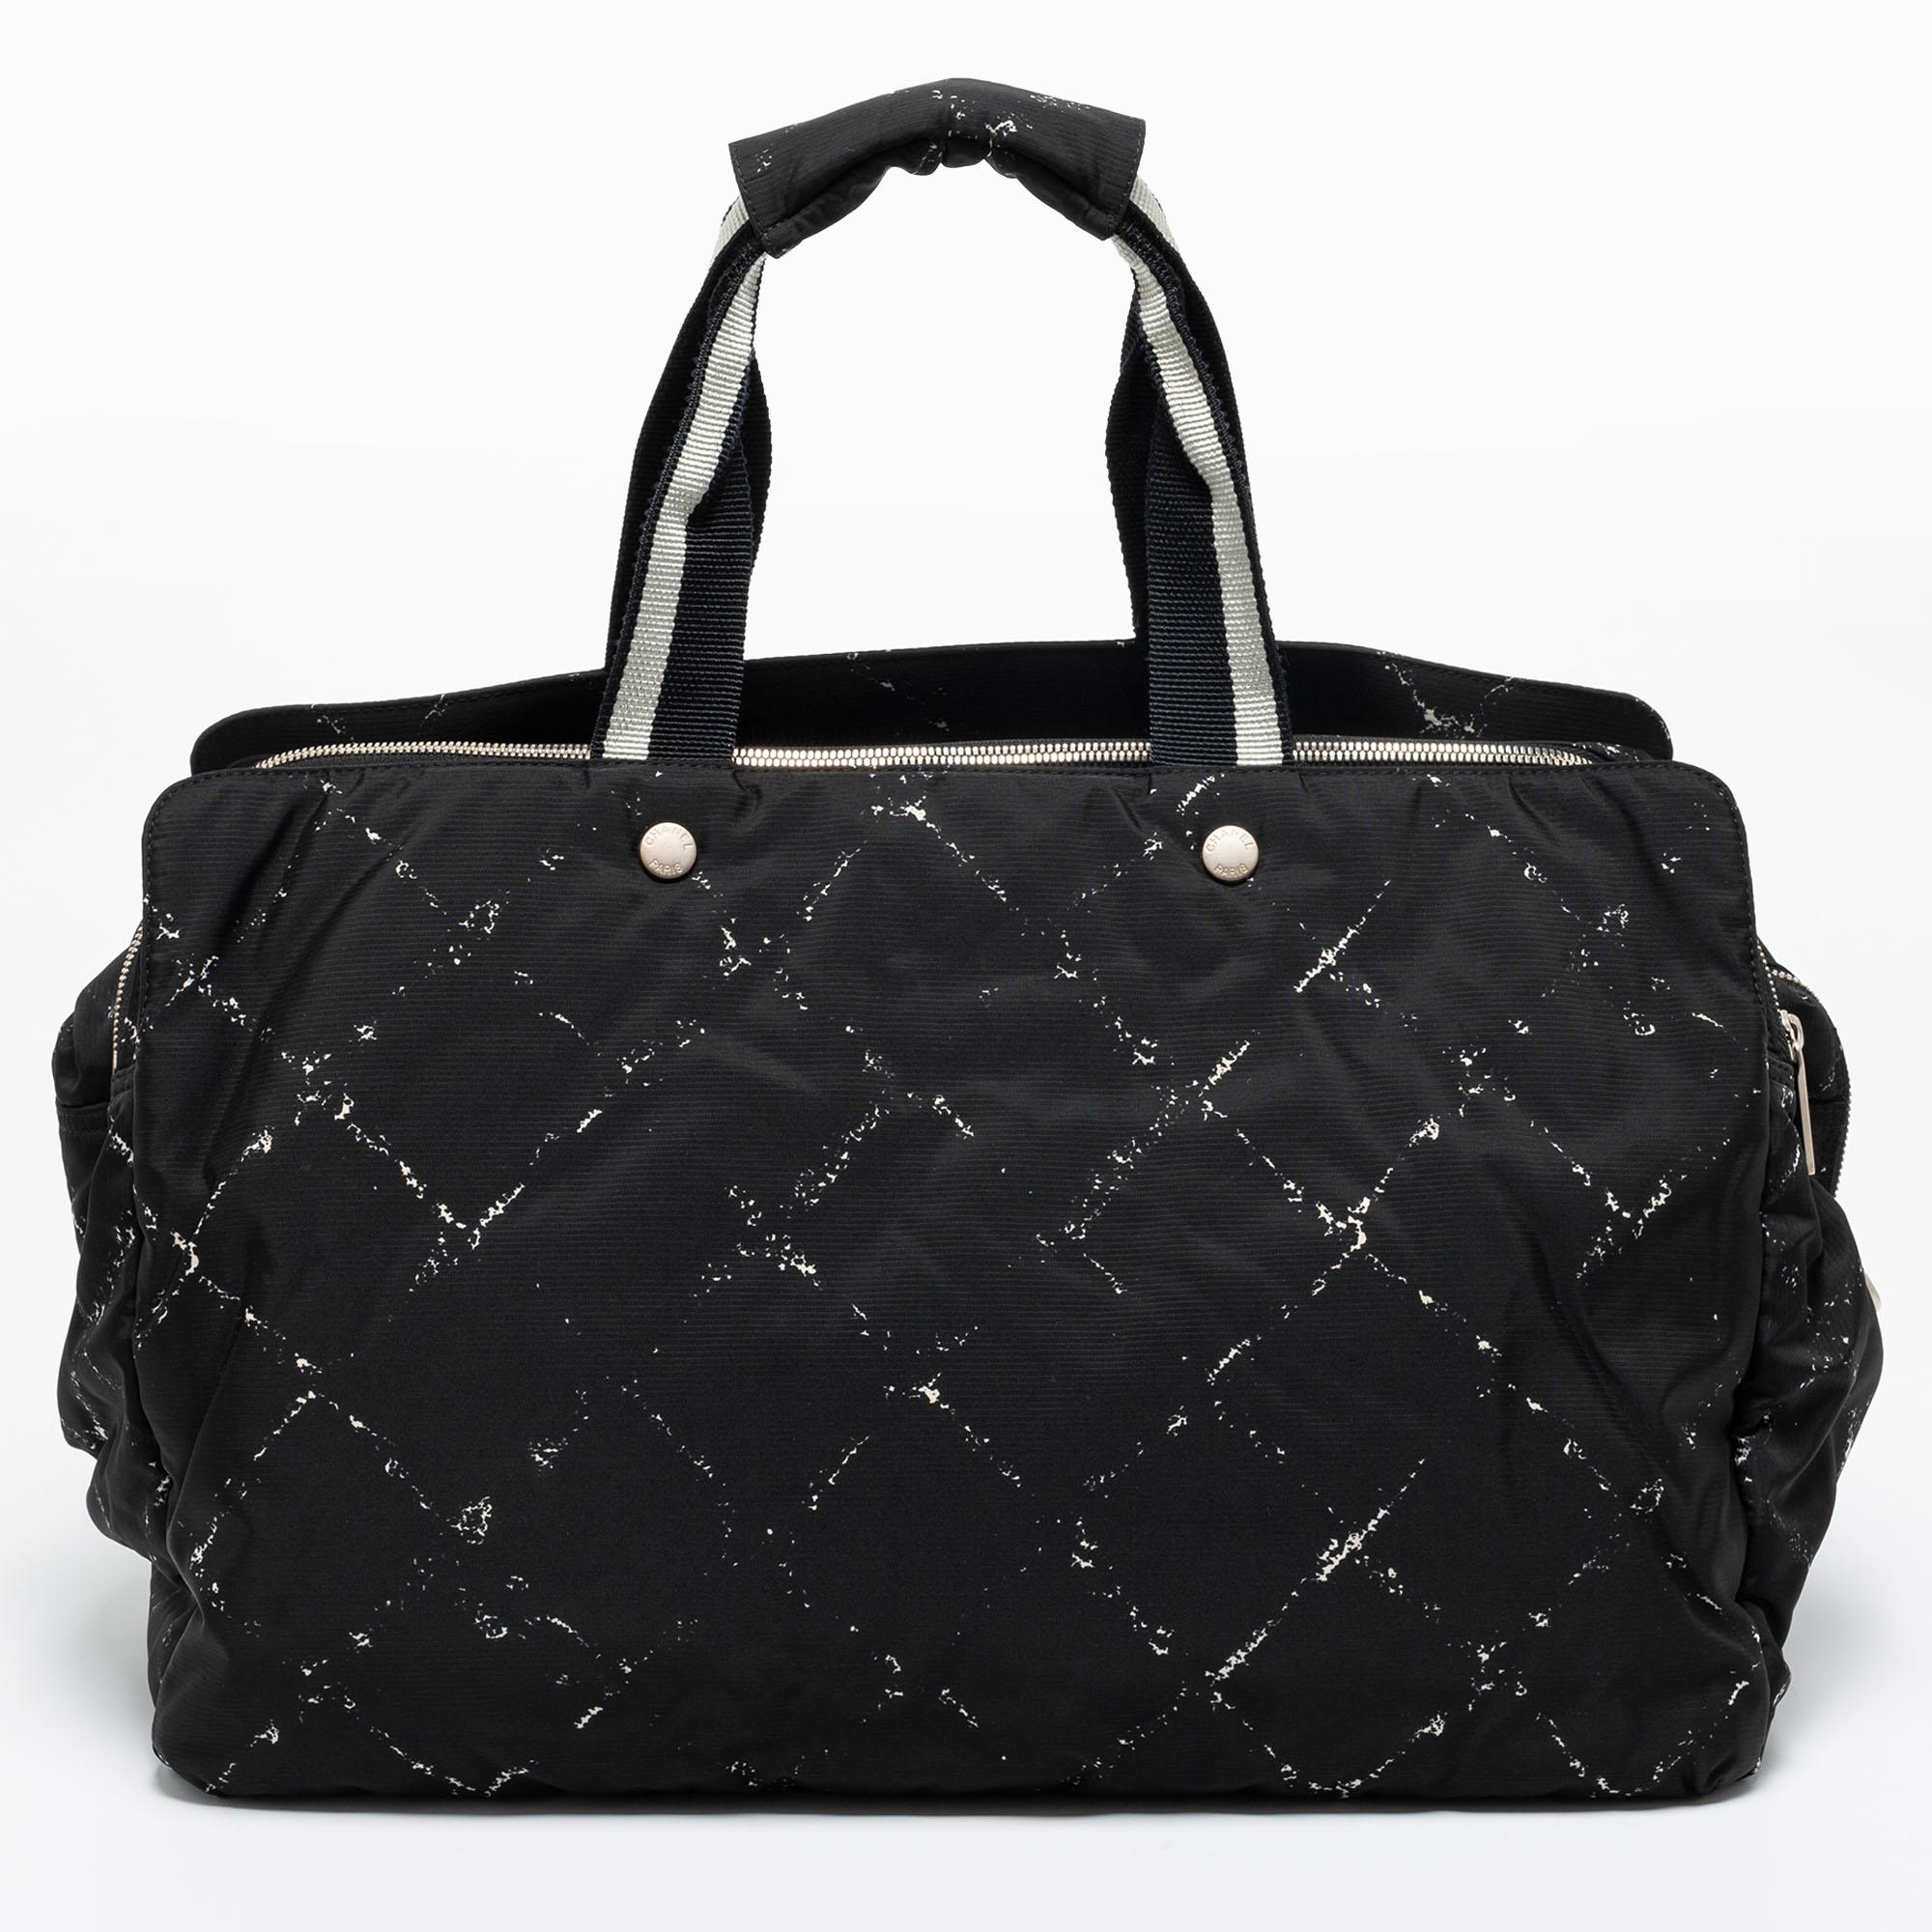 This Travel Line Duffel bag by Chanel will comfortably hold all your daily necessities. Crafted from fabric and nylon, it has a quilted print, top handles, and a shoulder strap. Perfect for weekend getaways!

Includes: Original Dustbag, Detachable